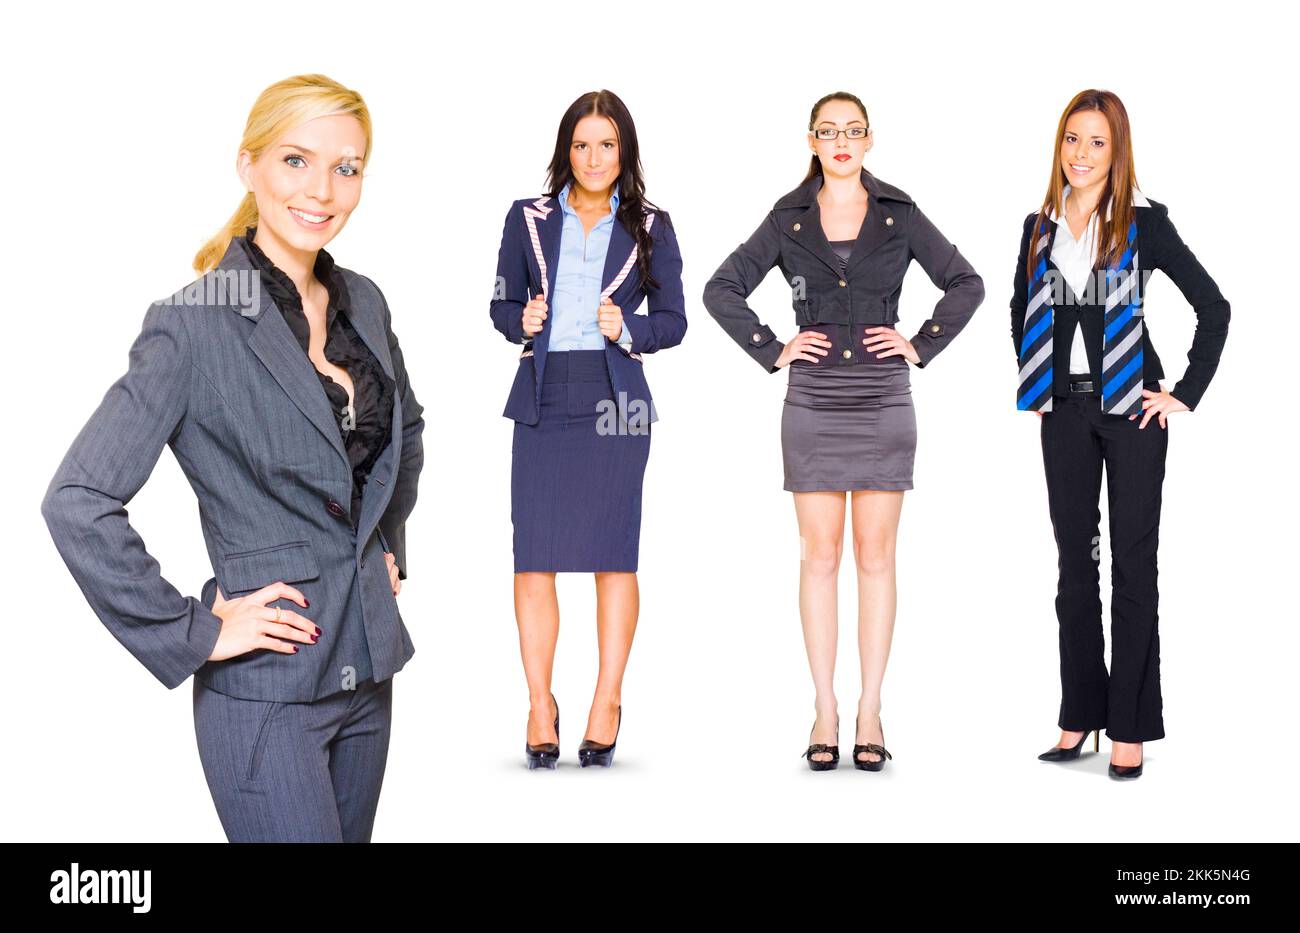 Happy Smiling Professional Team Of Four Young Female Business People Standing Confidently In Full Body And Half Body Portraits, Isolated Over White Ba Stock Photo